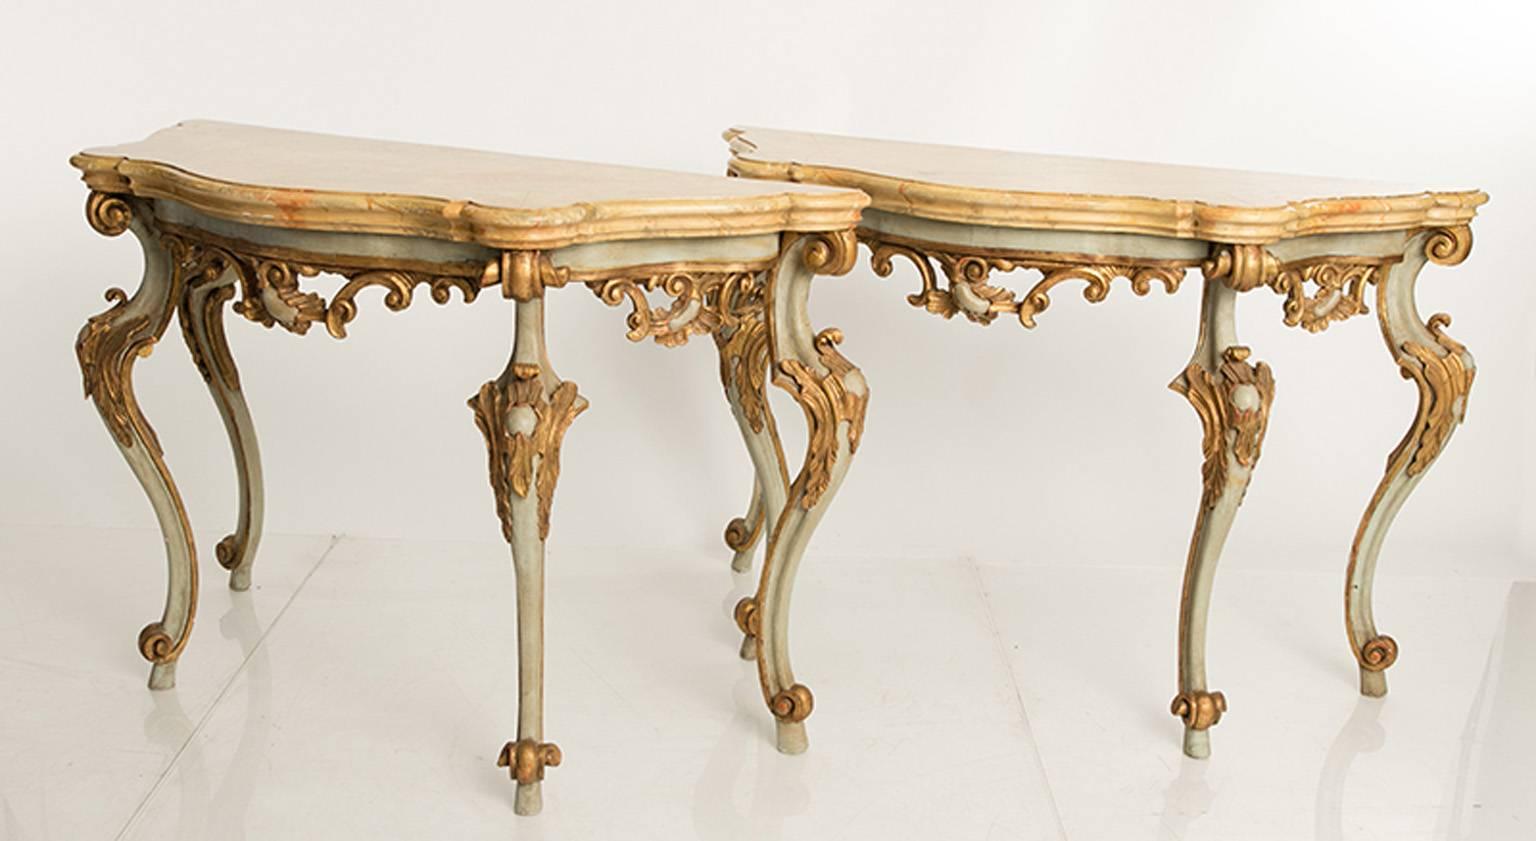 Pair of 19th century faux painted and gilded Venetian consoles. The apron and legs are curved and carved.